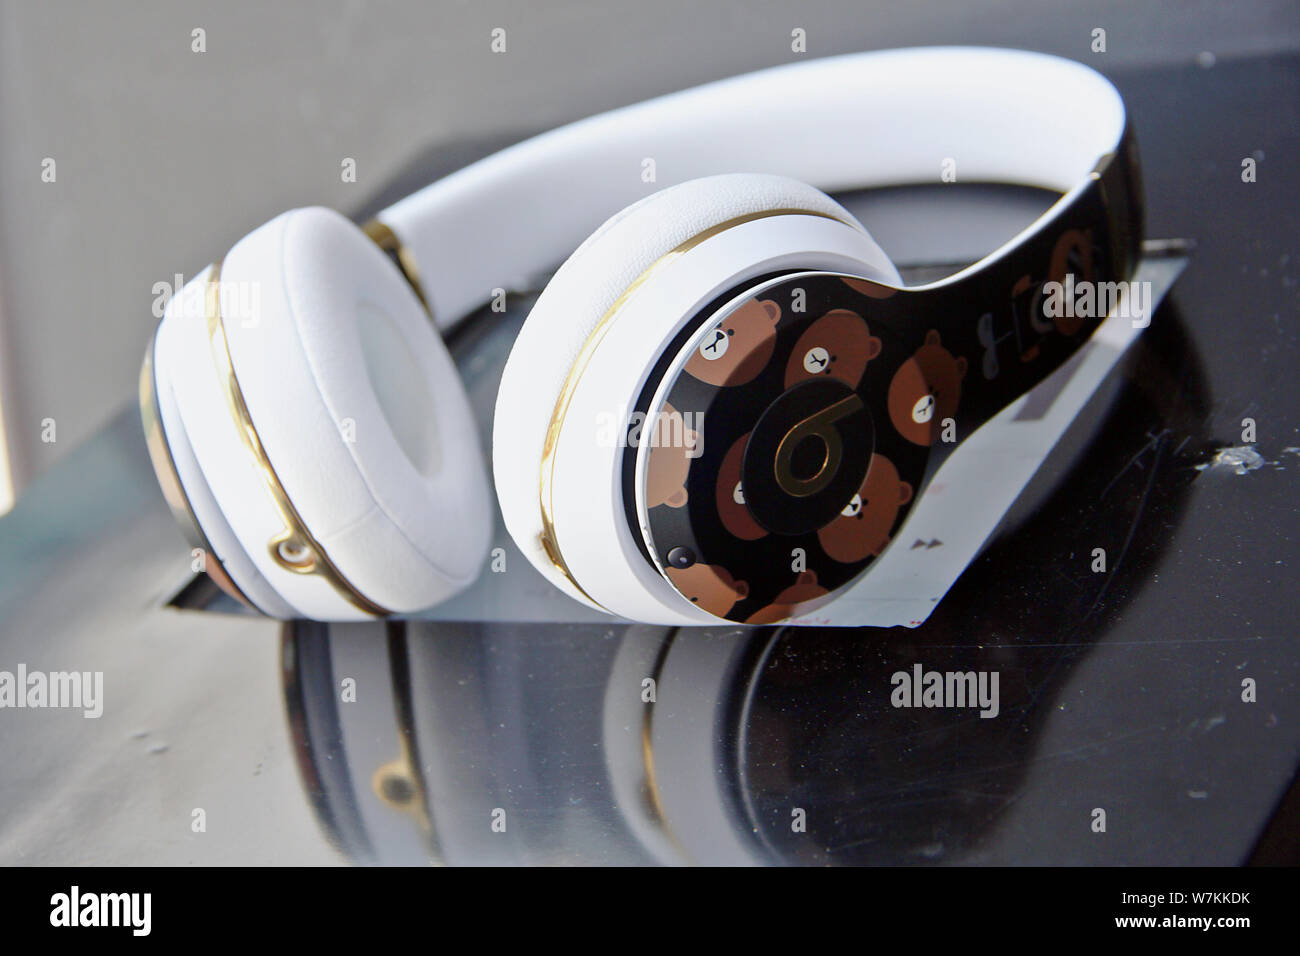 View of the Apple's latest collaborative headphone with Beats by